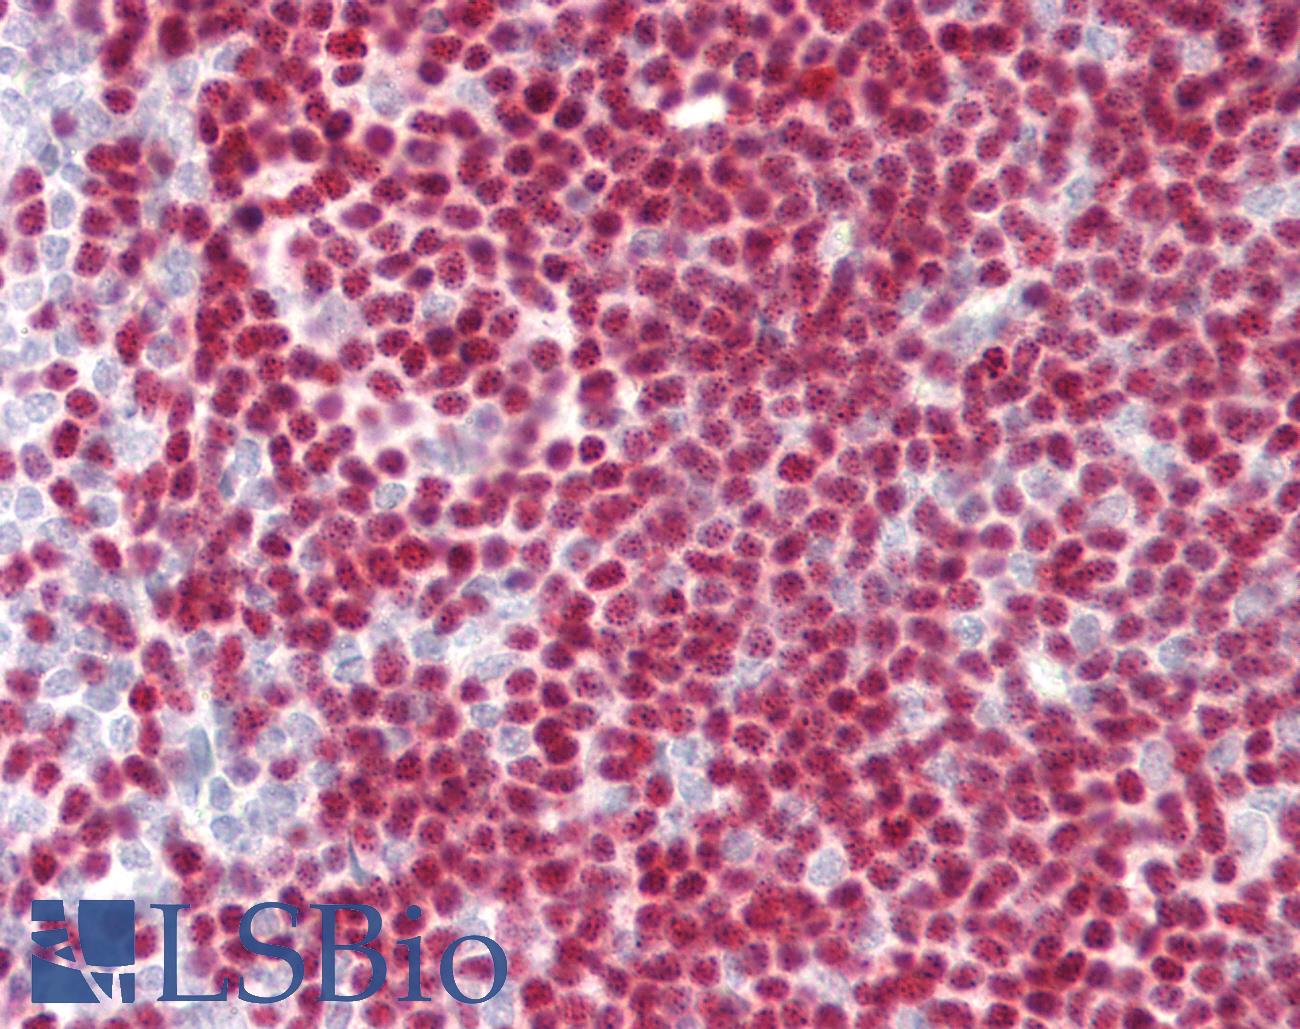 PAX5 Antibody - Human Tonsil: Formalin-Fixed, Paraffin-Embedded (FFPE)